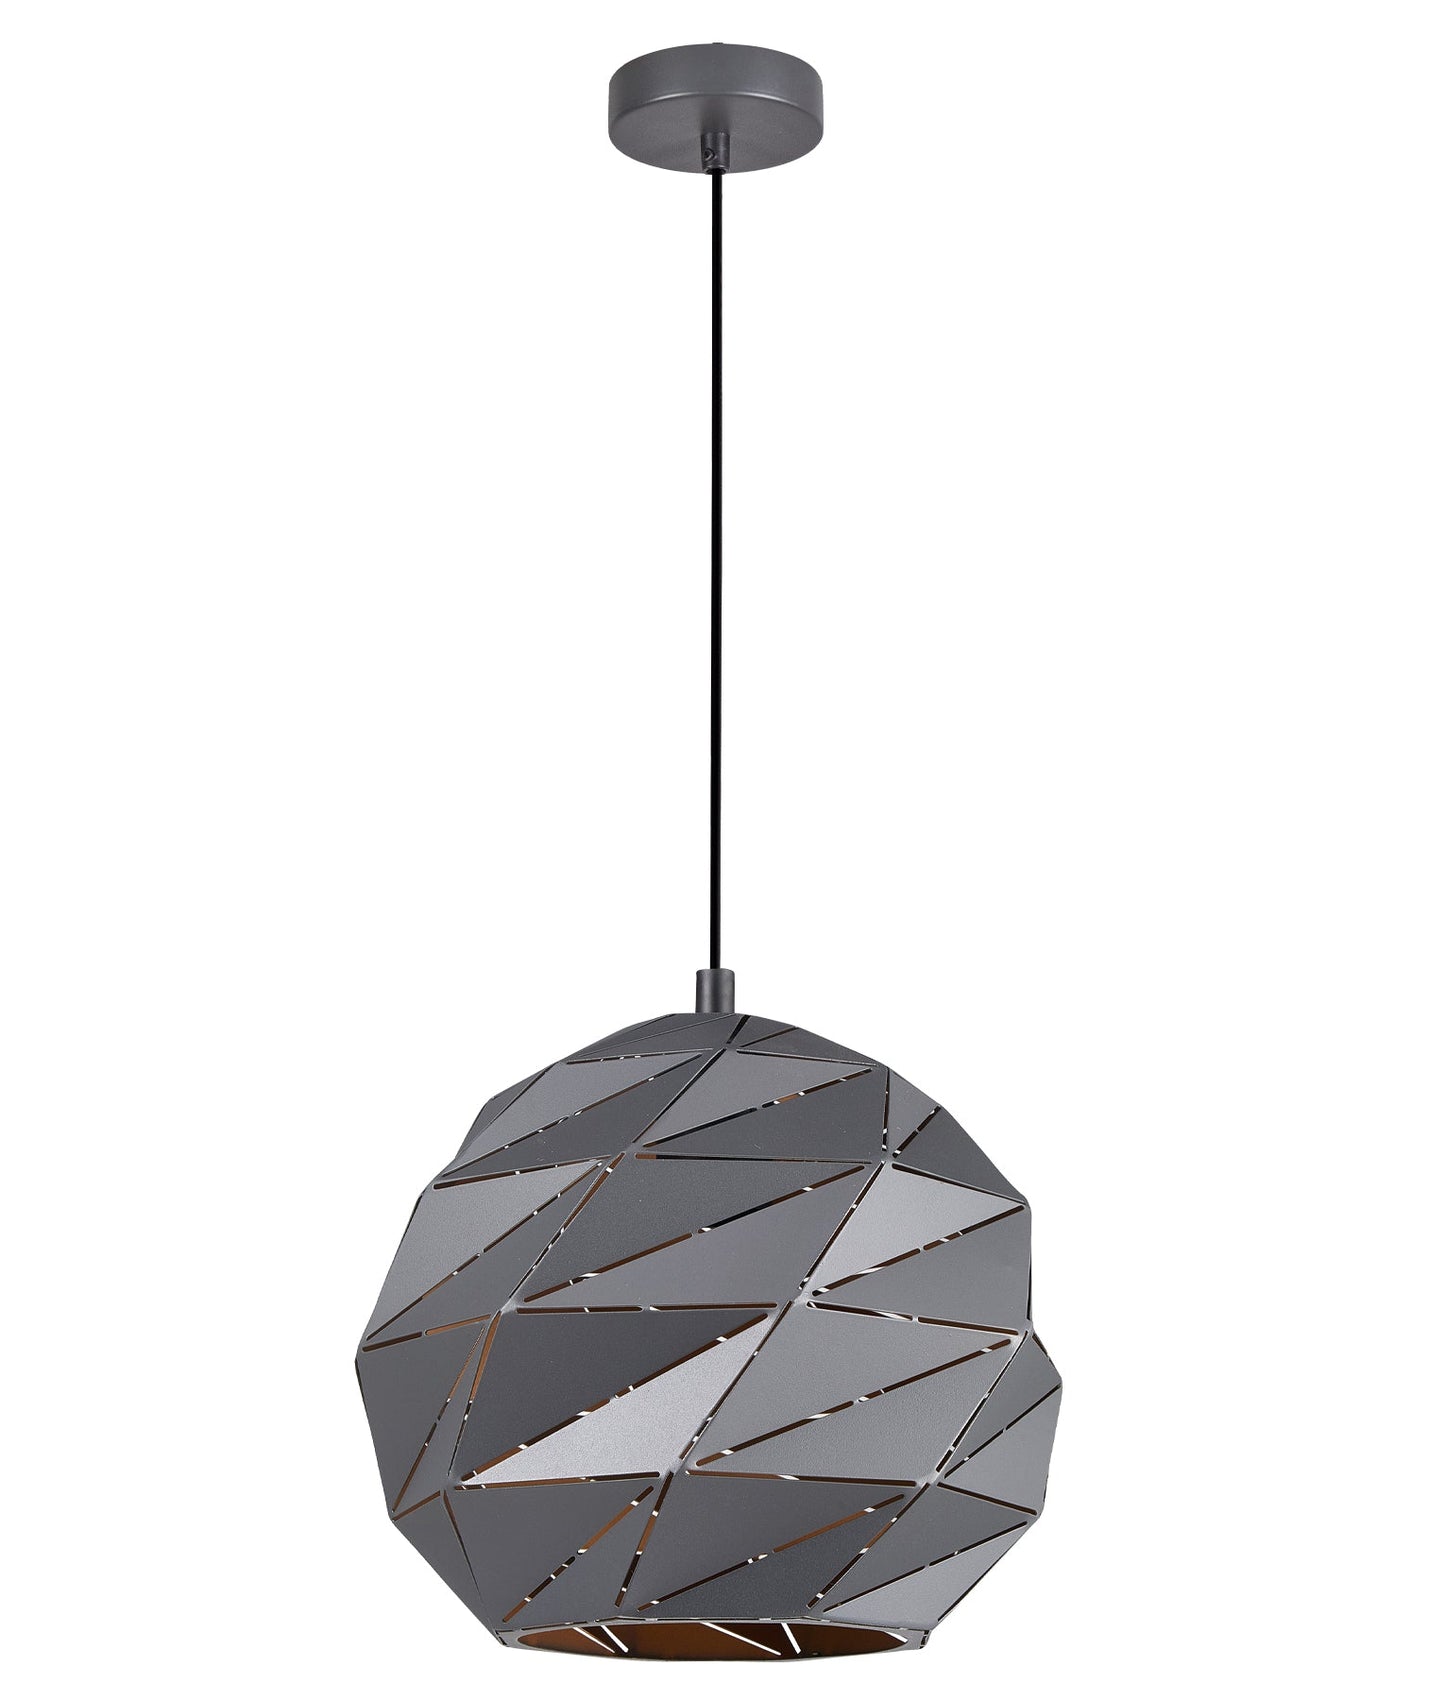 ORIGAMI: Interior Large Dome Carved Iron Origami Style Pendant Lights